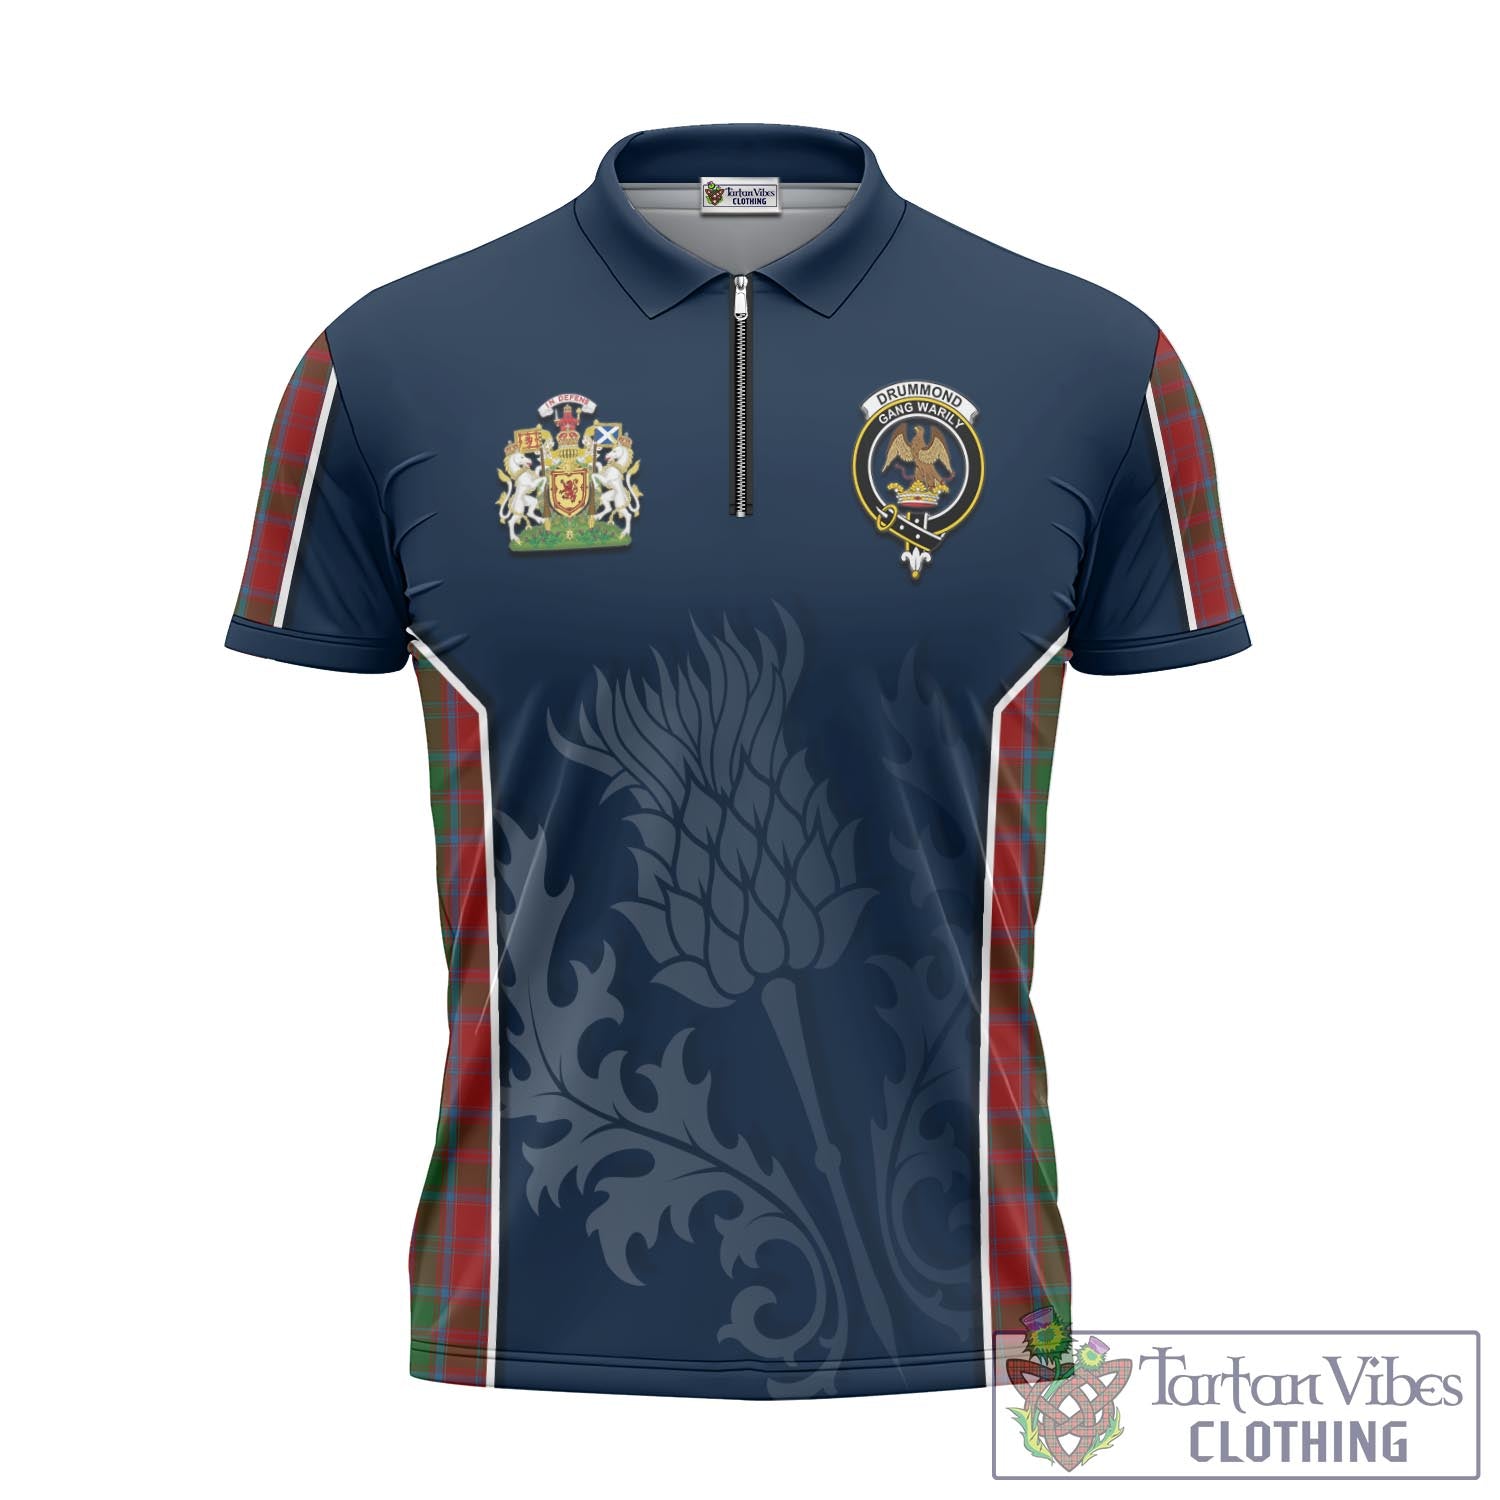 Tartan Vibes Clothing Drummond Tartan Zipper Polo Shirt with Family Crest and Scottish Thistle Vibes Sport Style